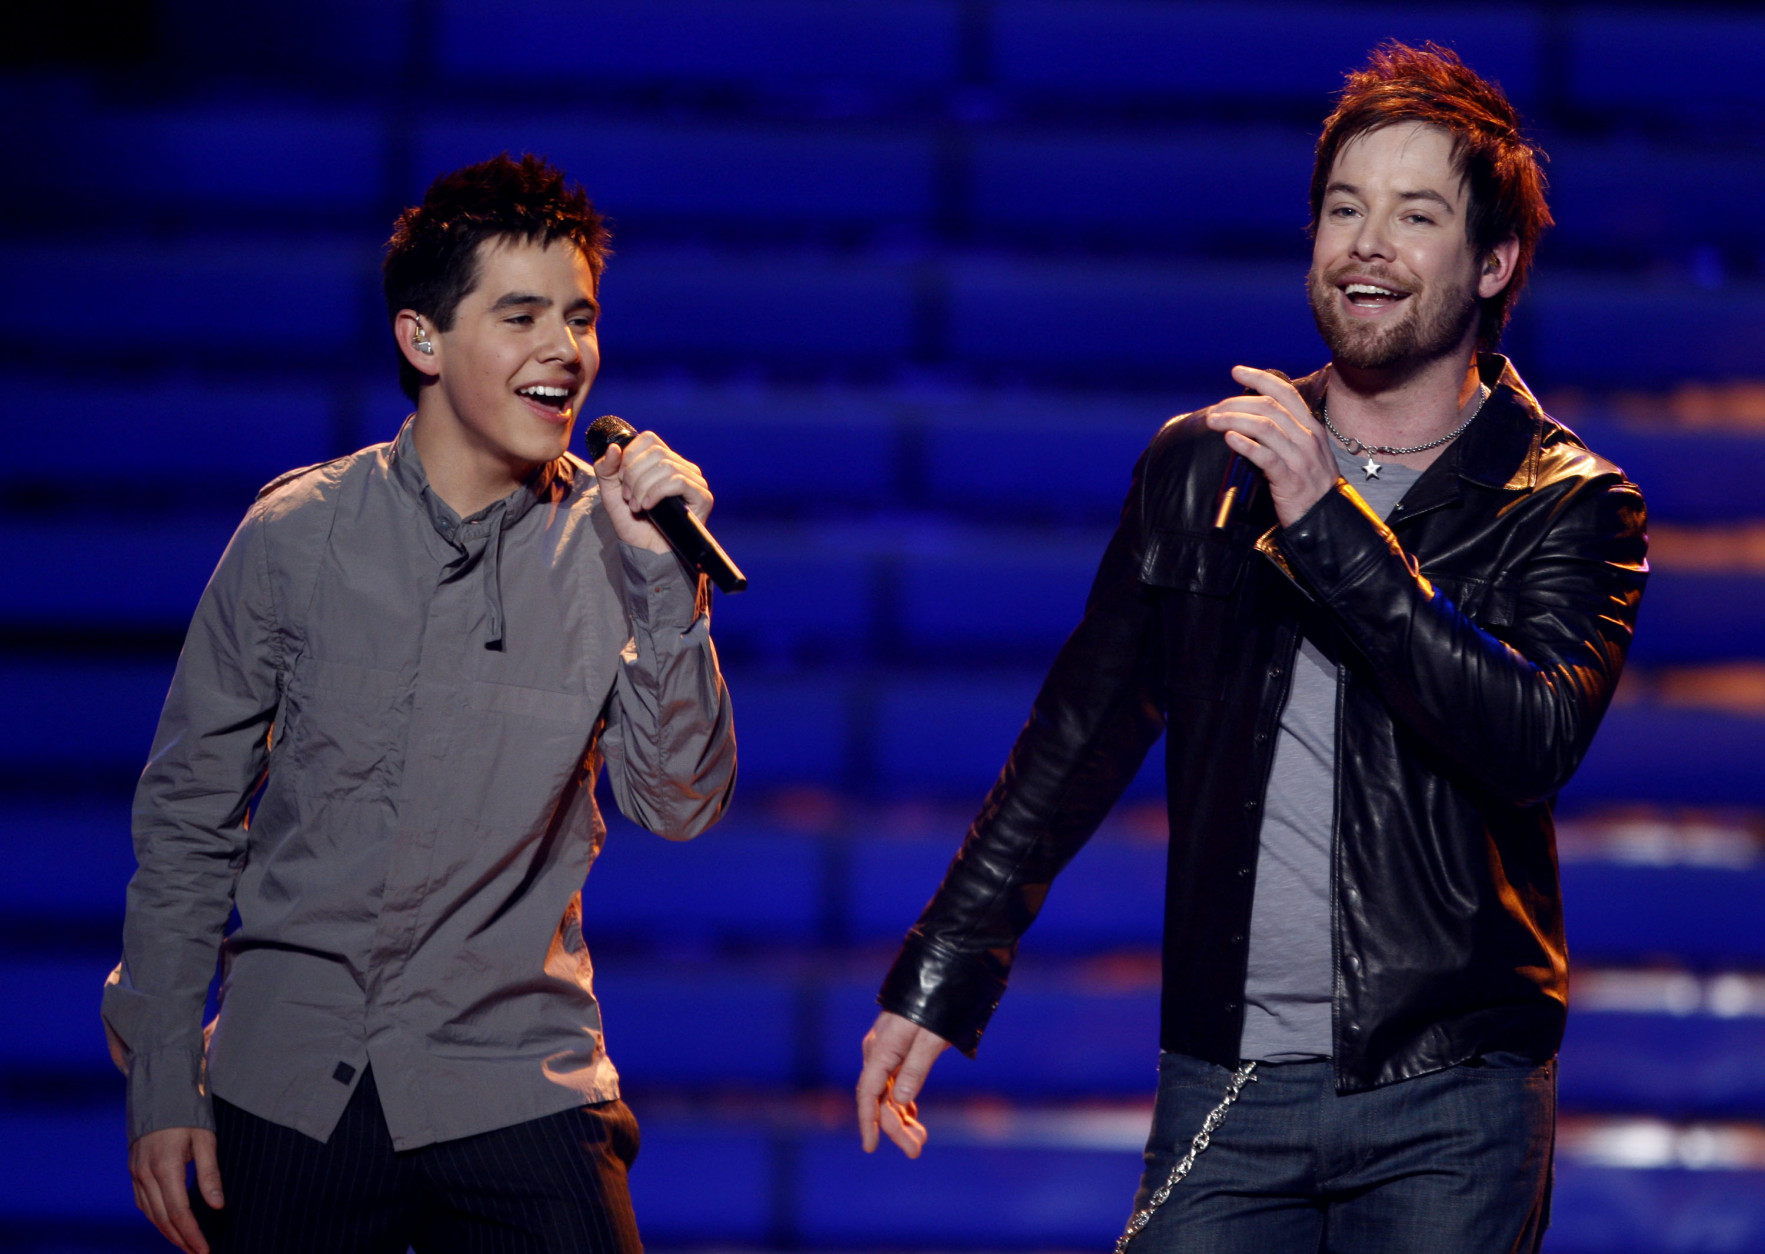 David Cook, right, and David Archuleta perform during the opening act of the season finale of American Idol on Wednesday May 21, 2008, in Los Angeles. (Mark Mainz/AP Images for Fox)